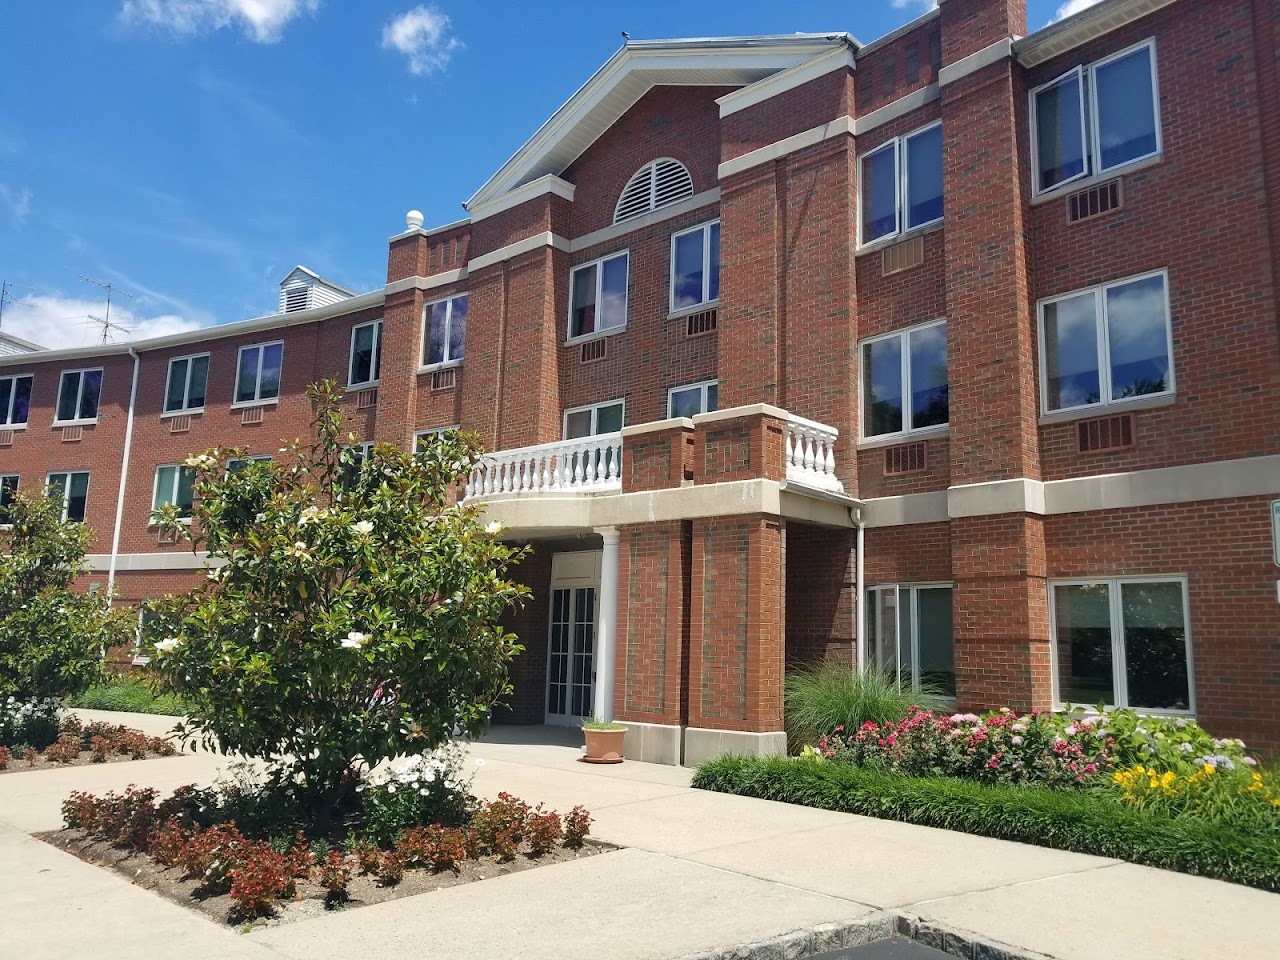 Photo of SECOND WESTFIELD SENIOR CITIZEN HOUSING. Affordable housing located at 1129 BOYNTON AVENUE WESTFIELD TWP, NJ 07090